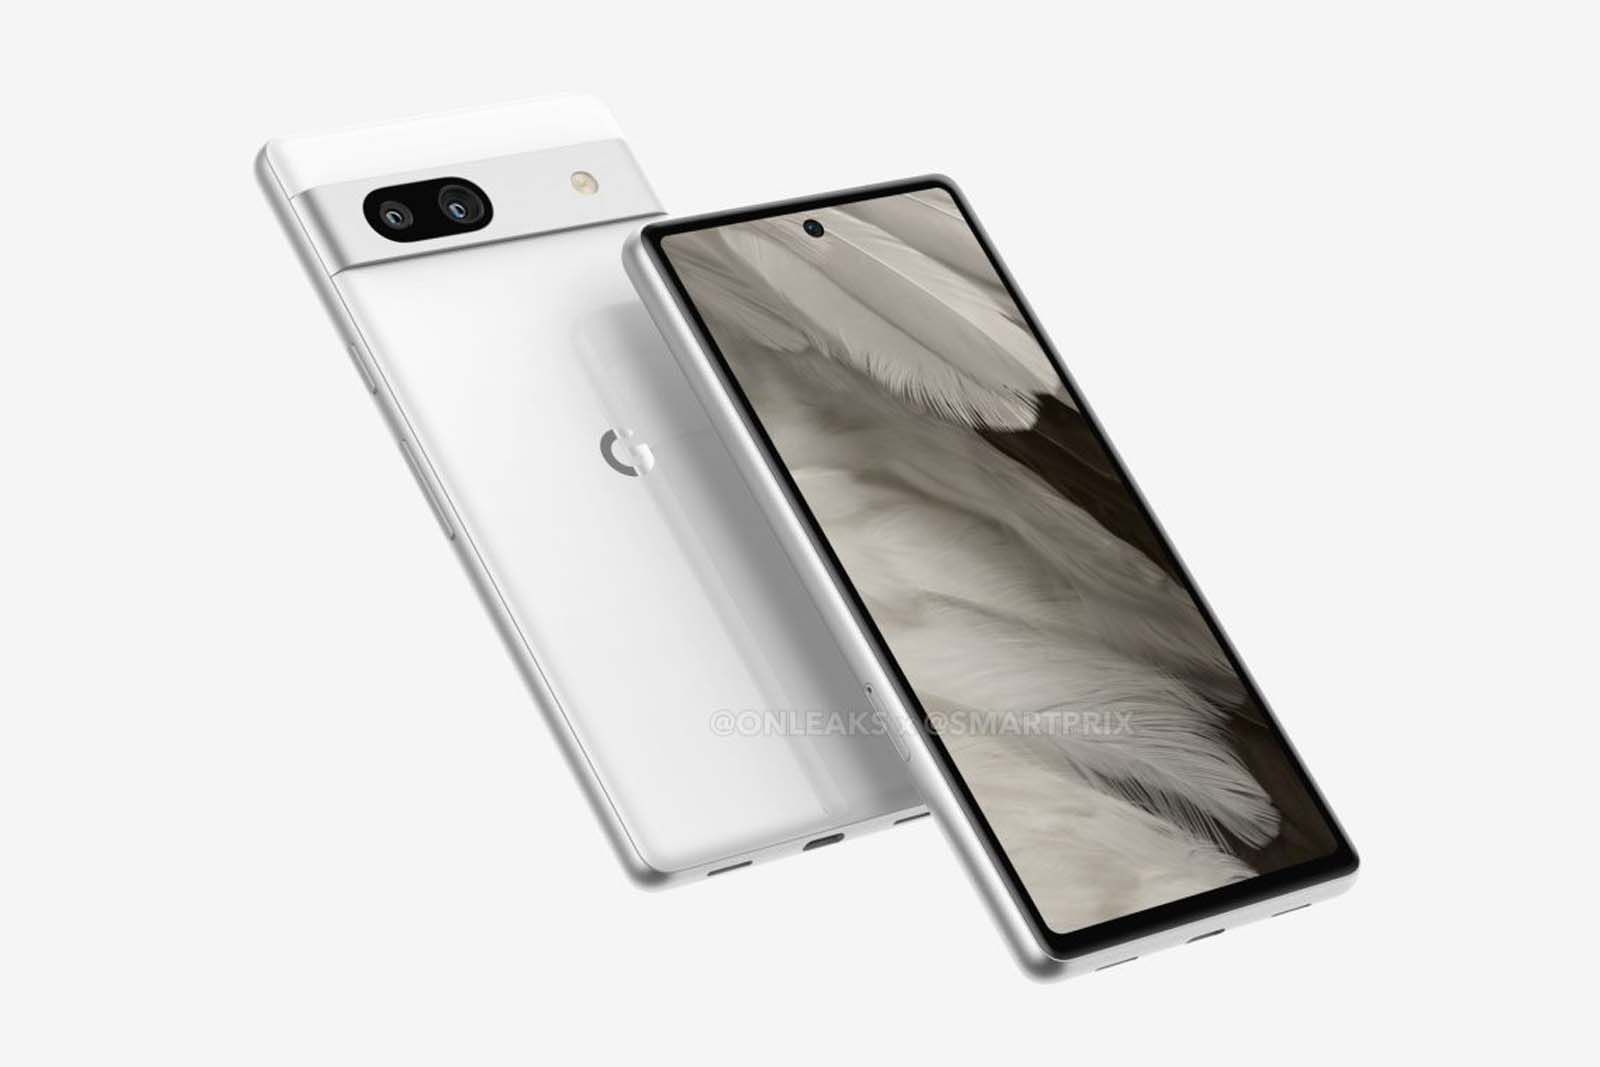 Some Pixel 7 phones won’t let you save zoomed photos due to a glitch